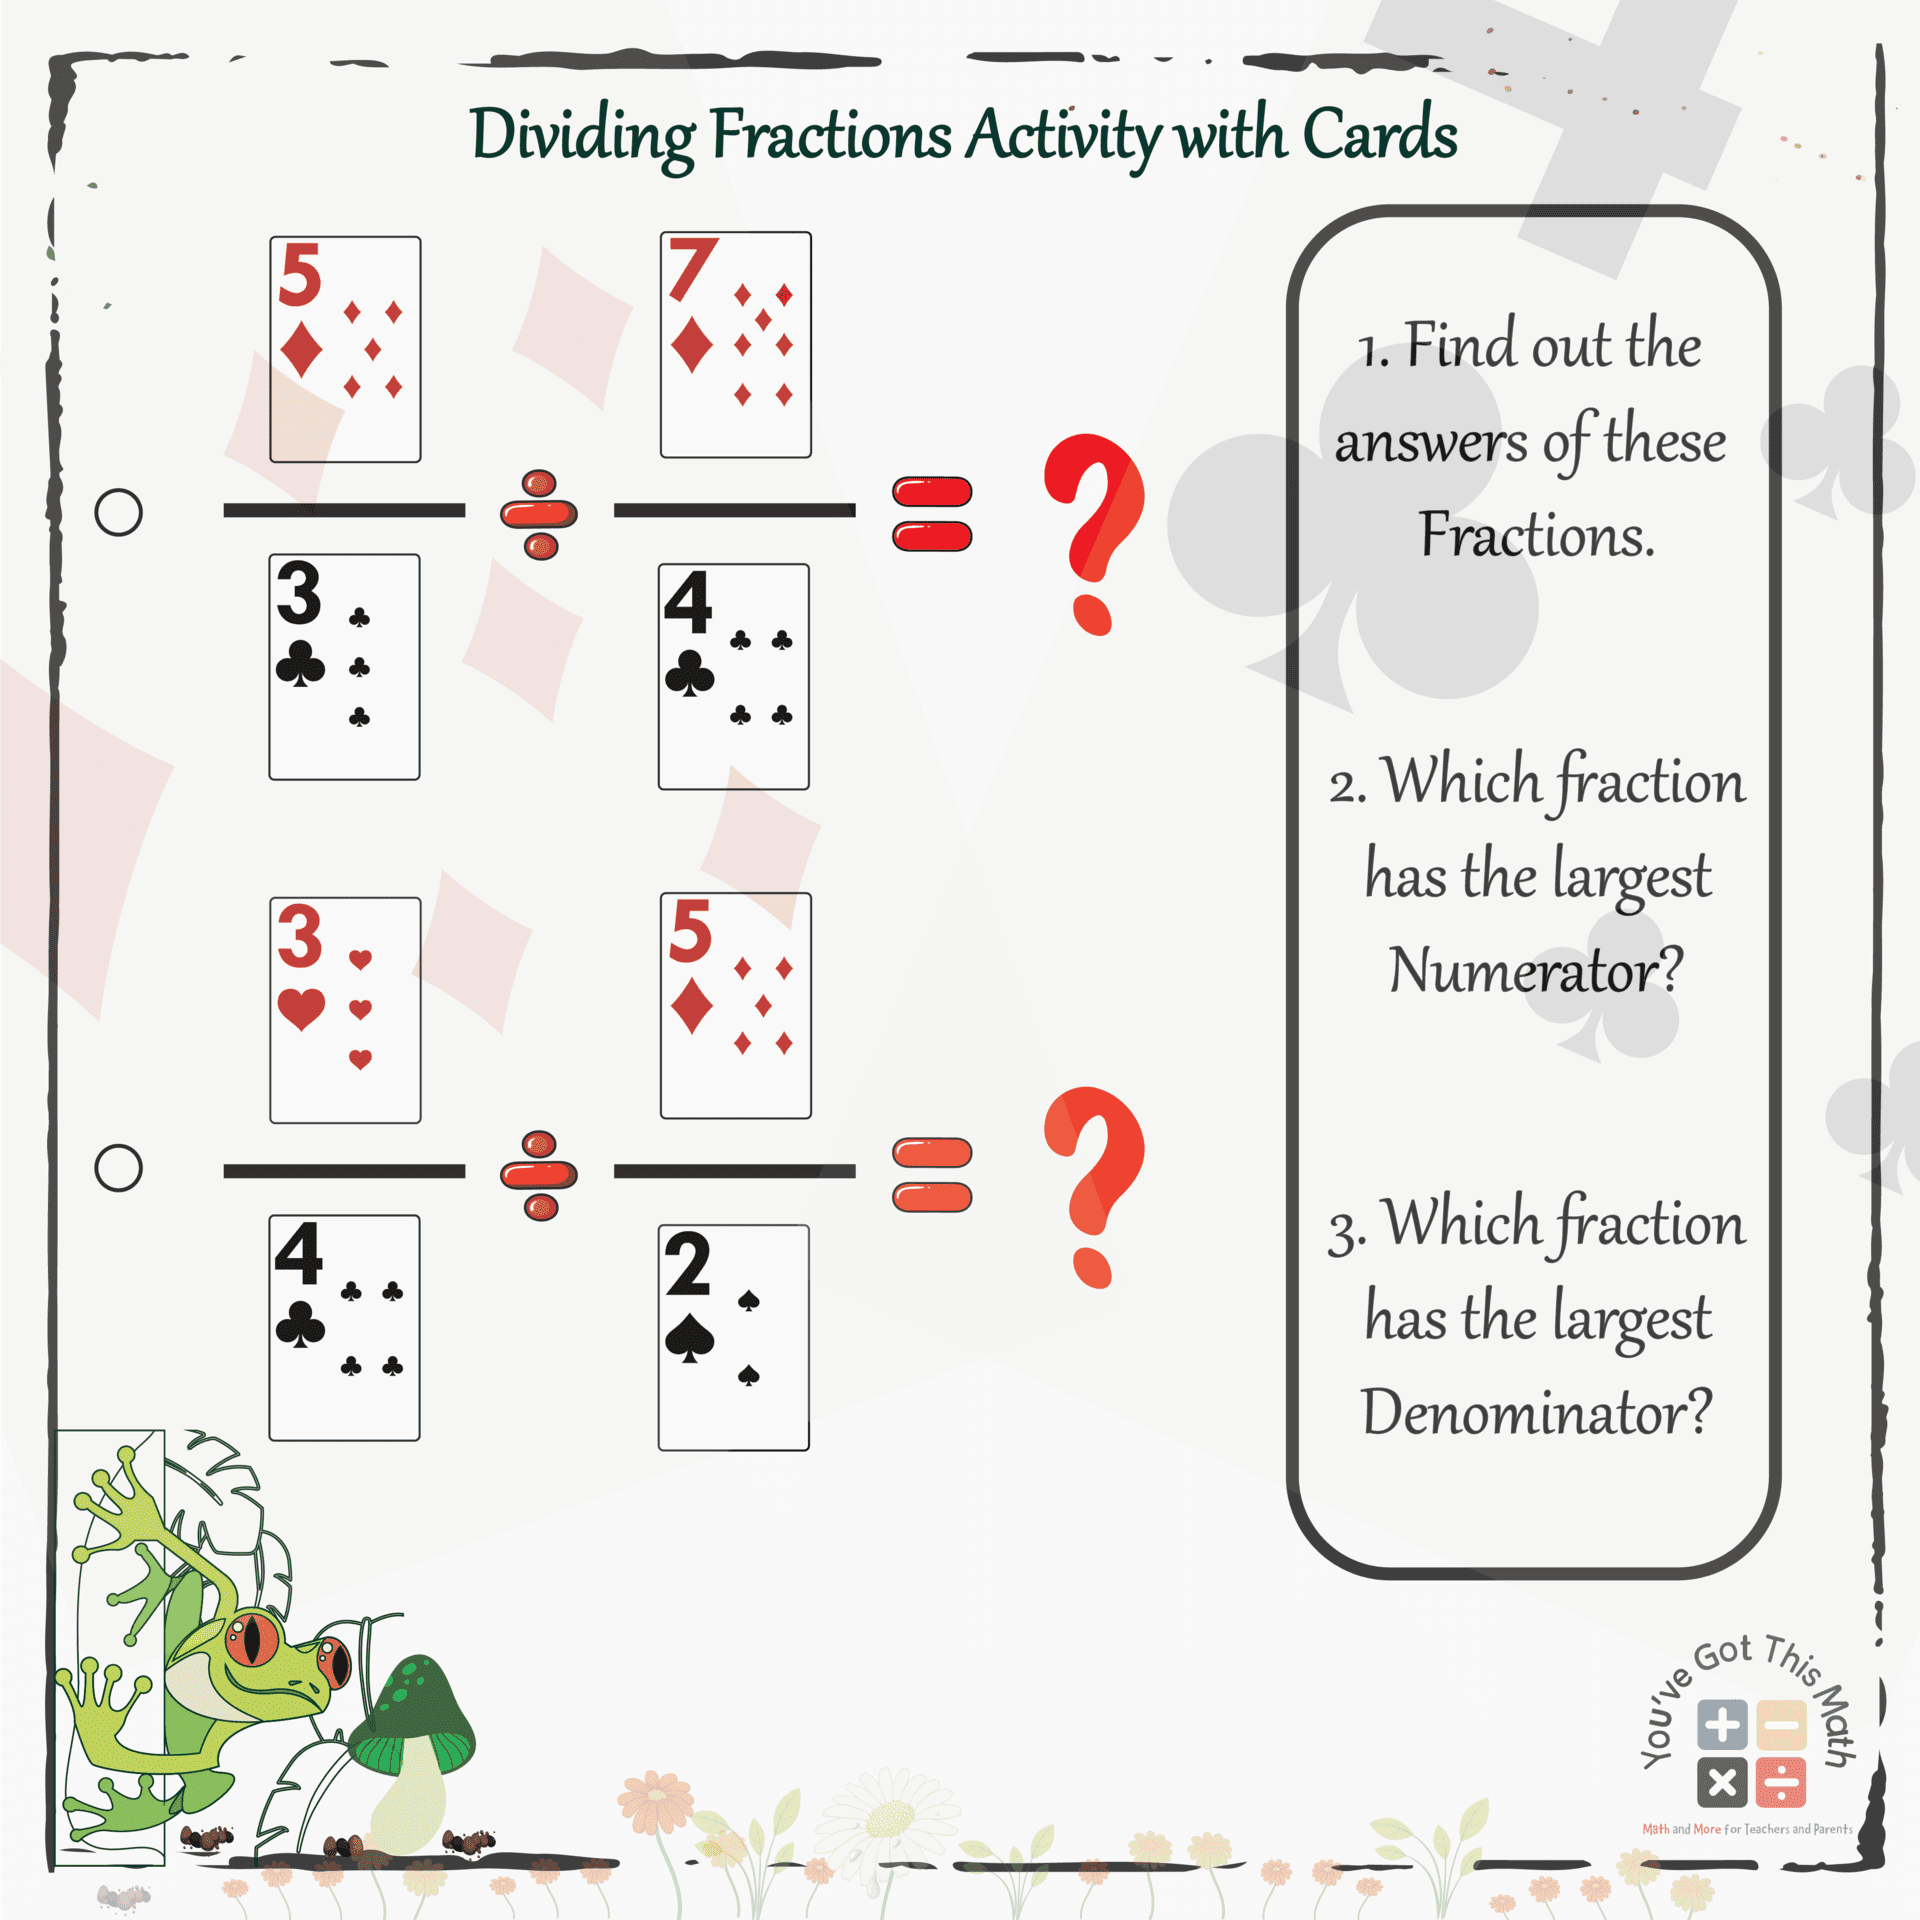 Dividing Fractions Activity with Cards